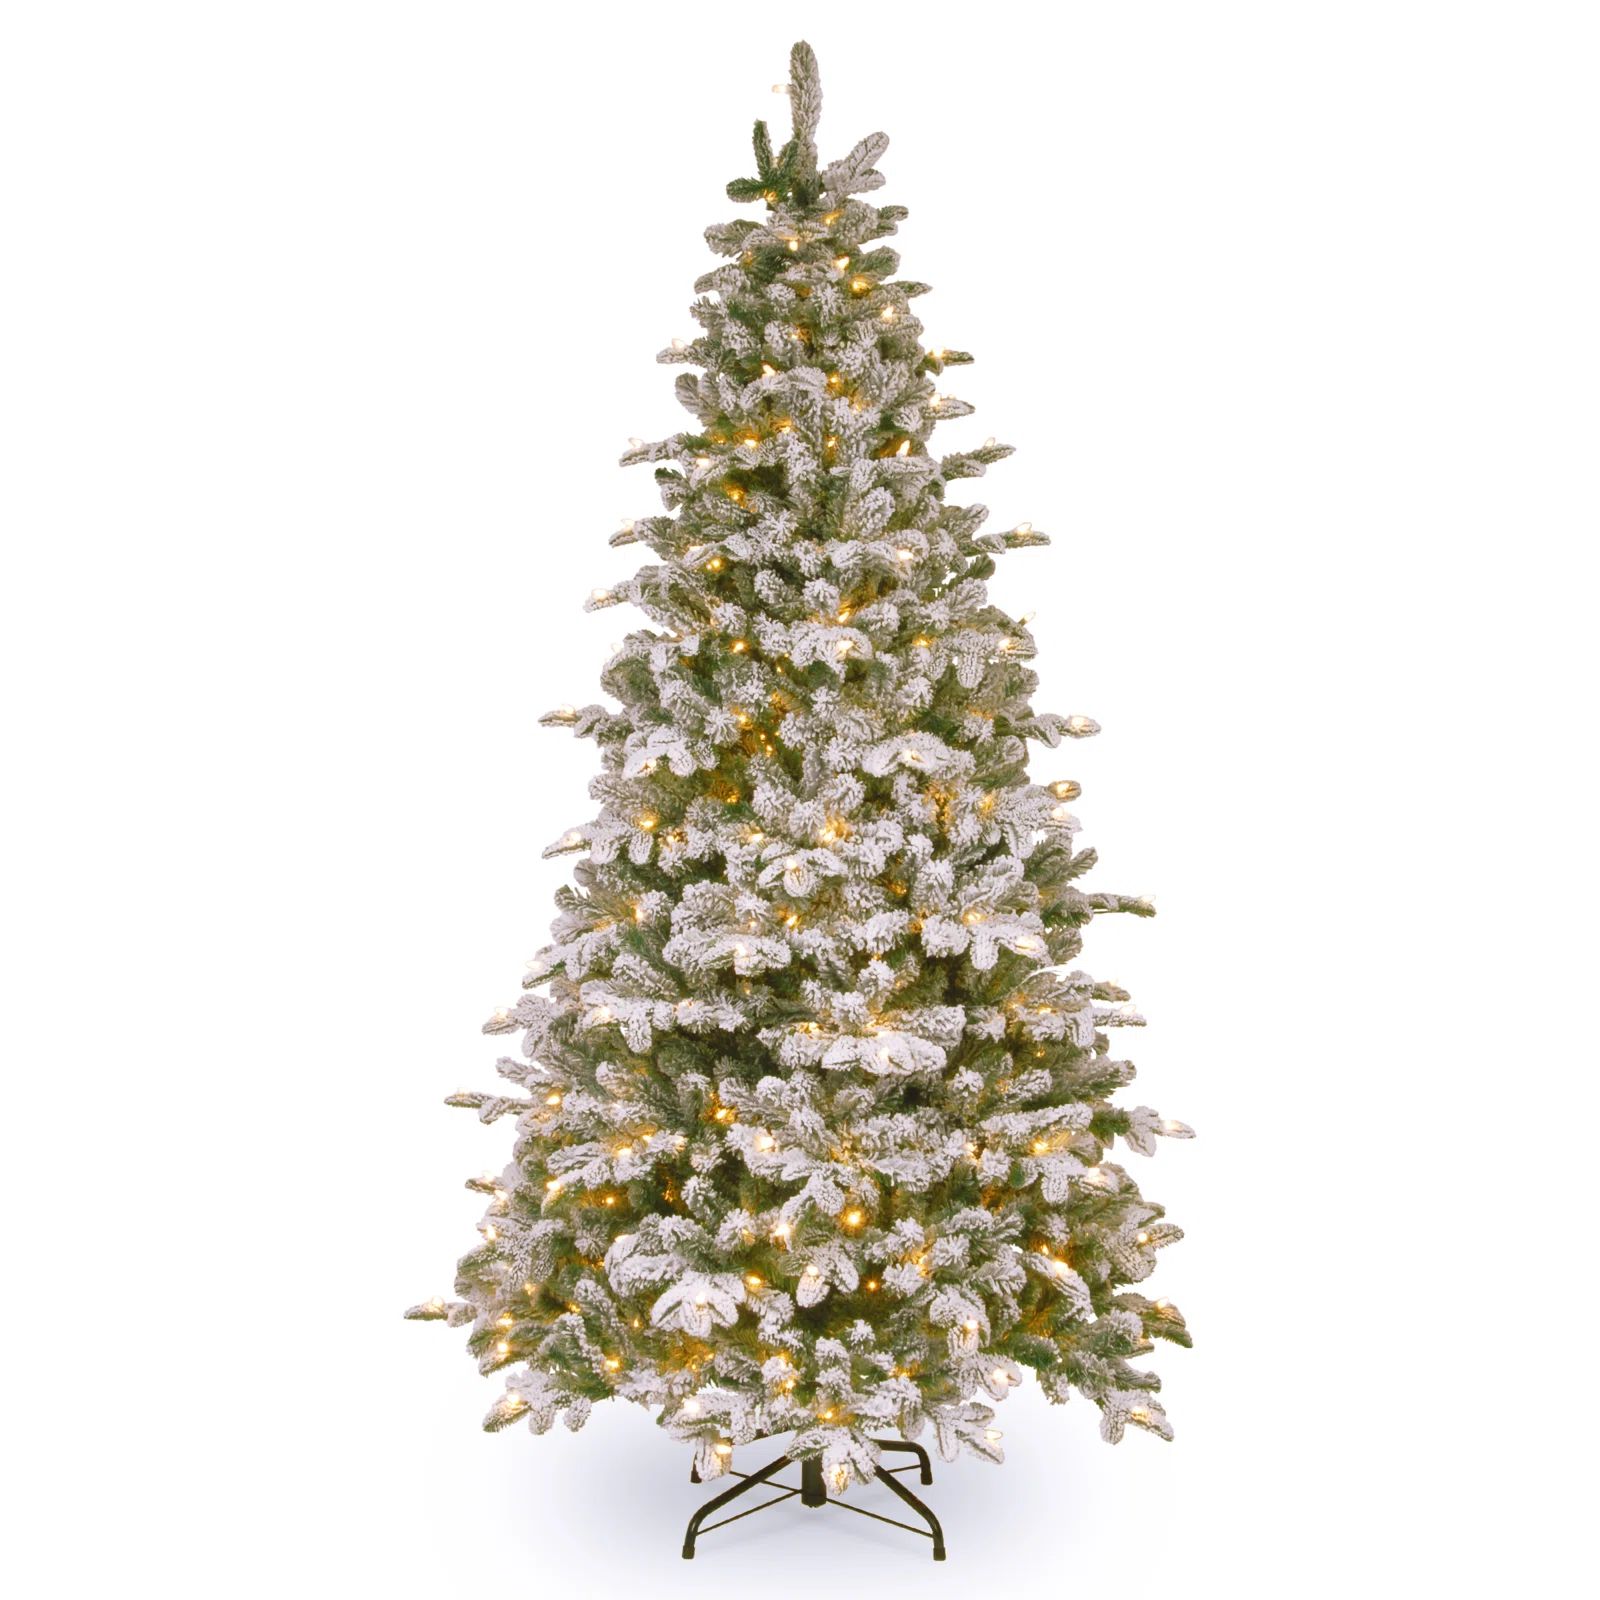 Artificial Fir Flocked/Frosted Christmas Tree with Lights | Wayfair North America